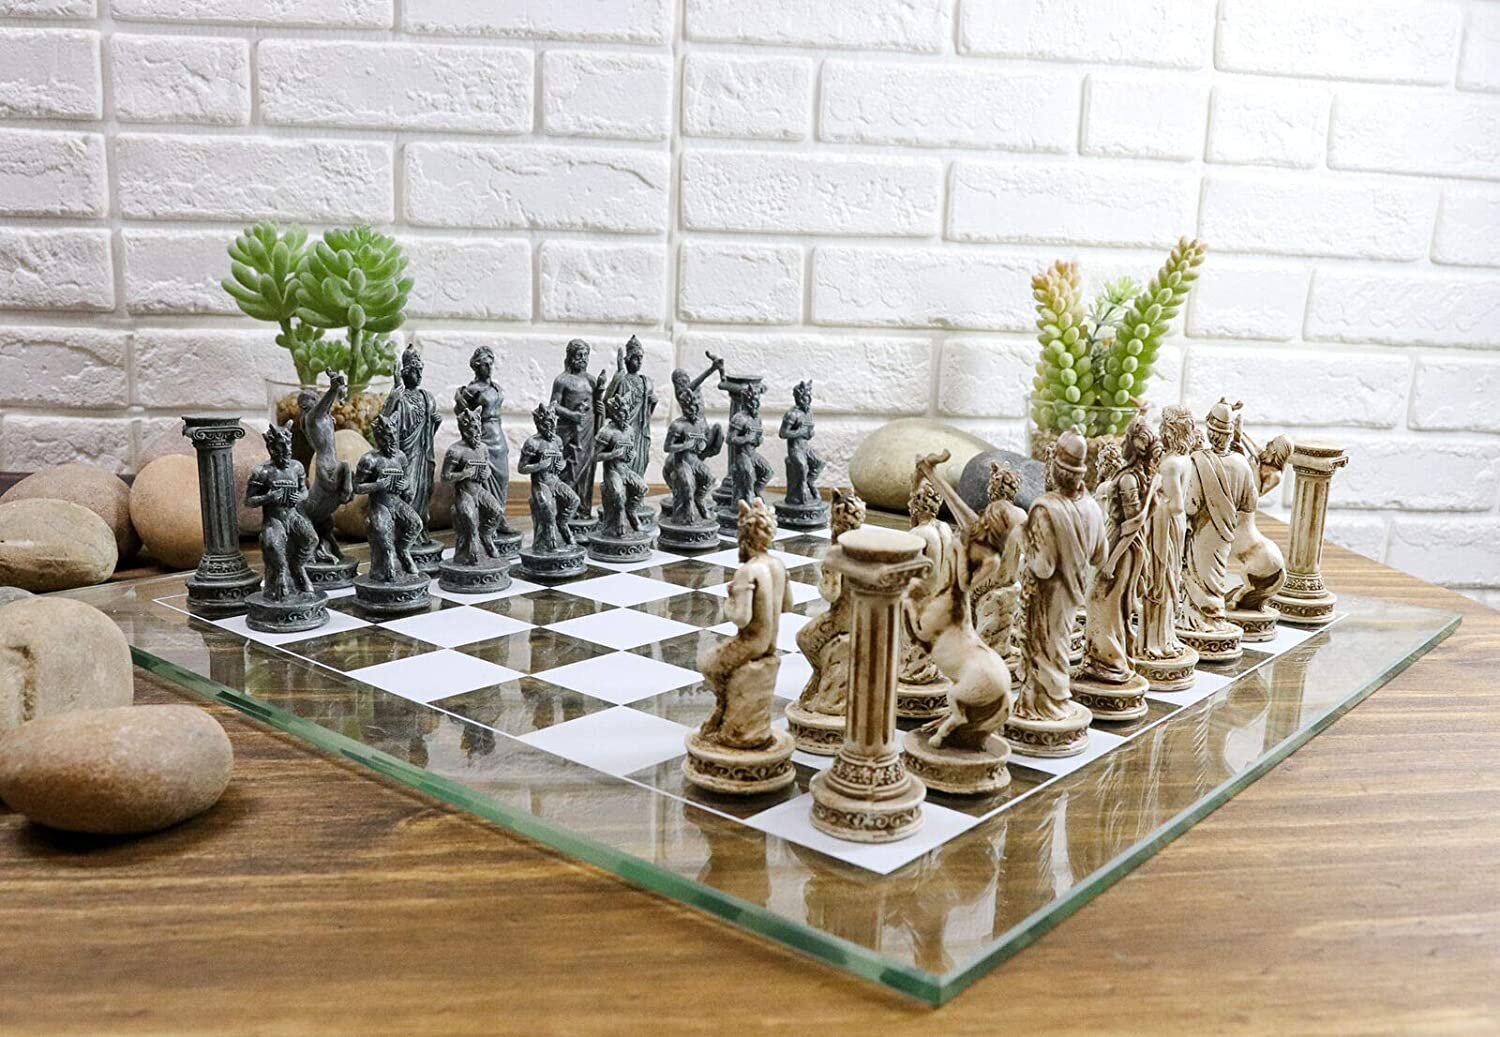 MegaChess 8 Tall Oversized Chess Set with Vinyl Roll-up Board & Reviews